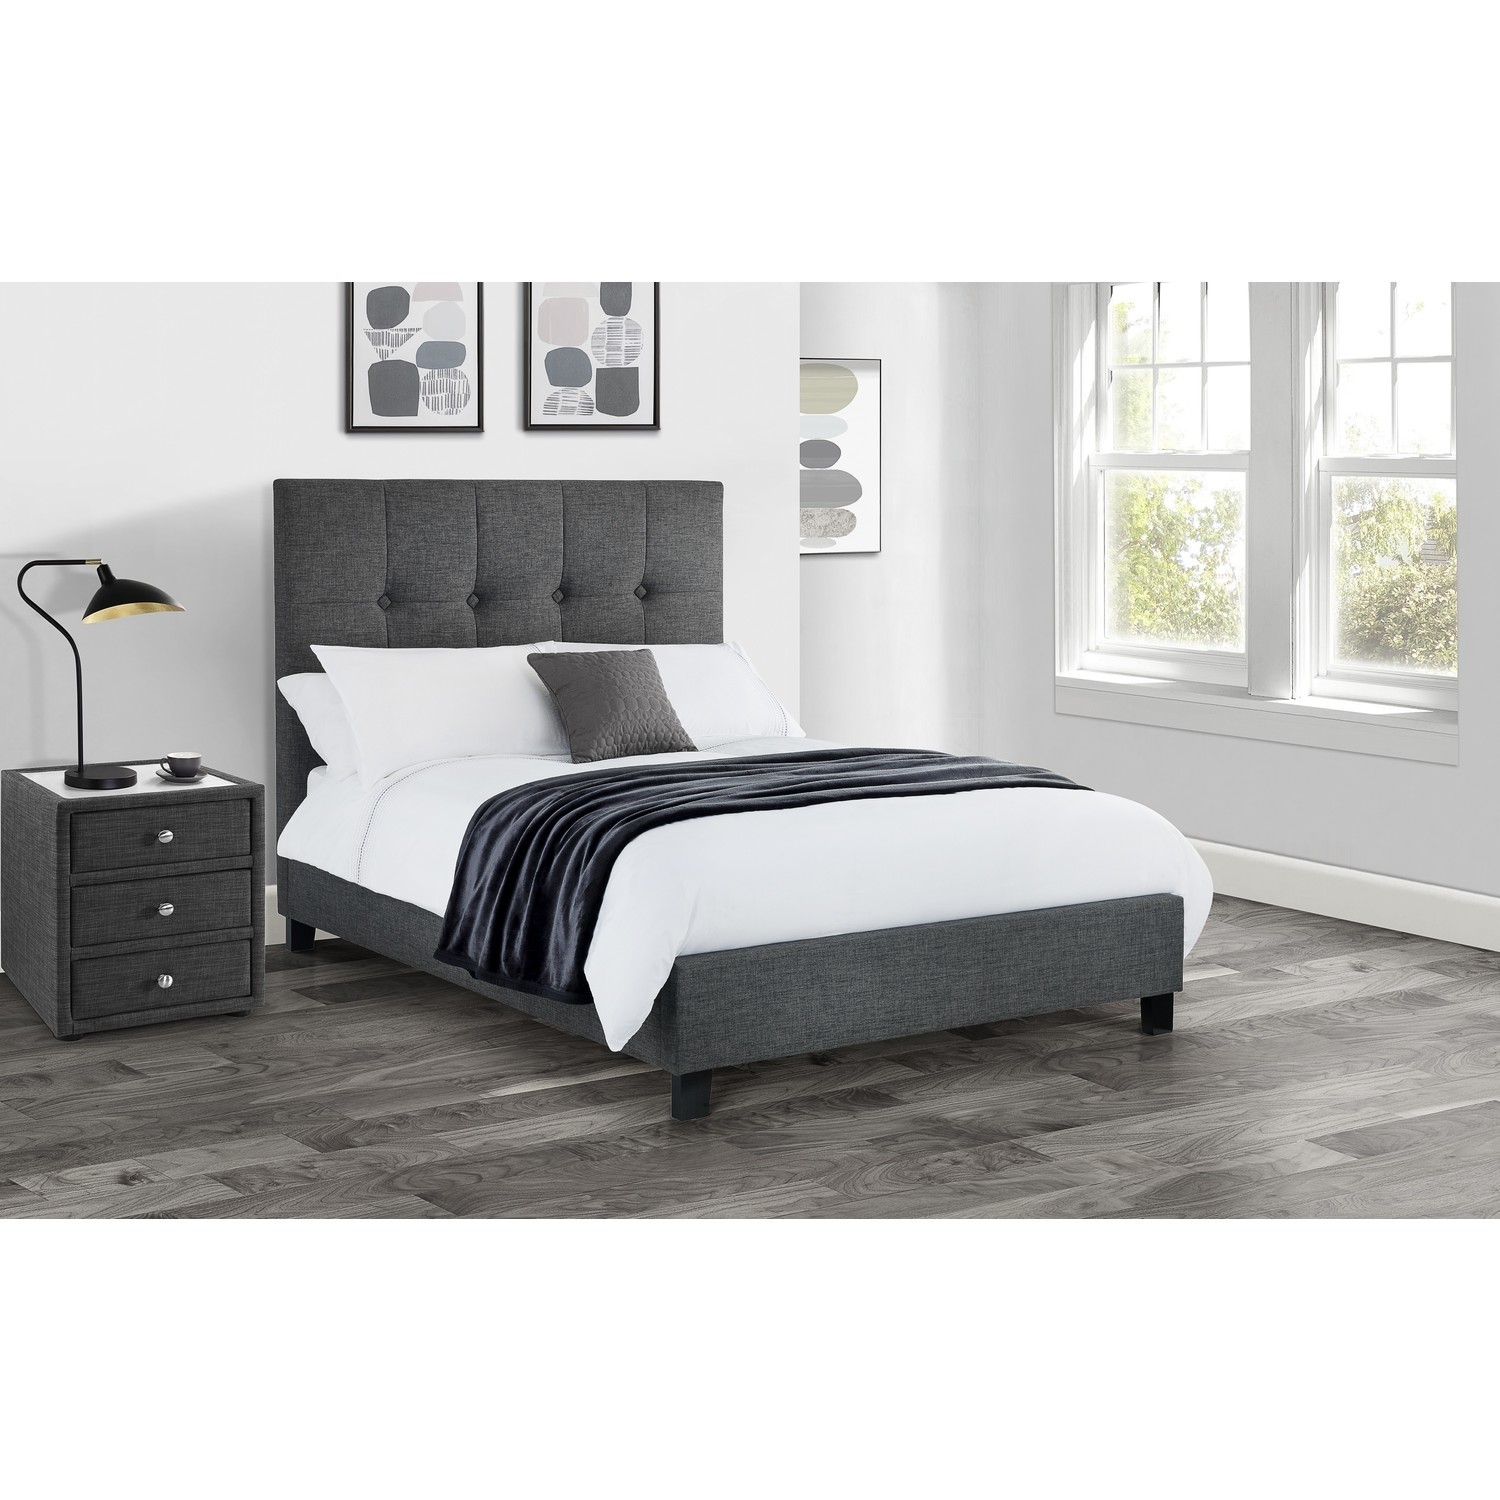 Dark Grey Super King Size Bed Frame, Tall Headboards For Super King Size Beds